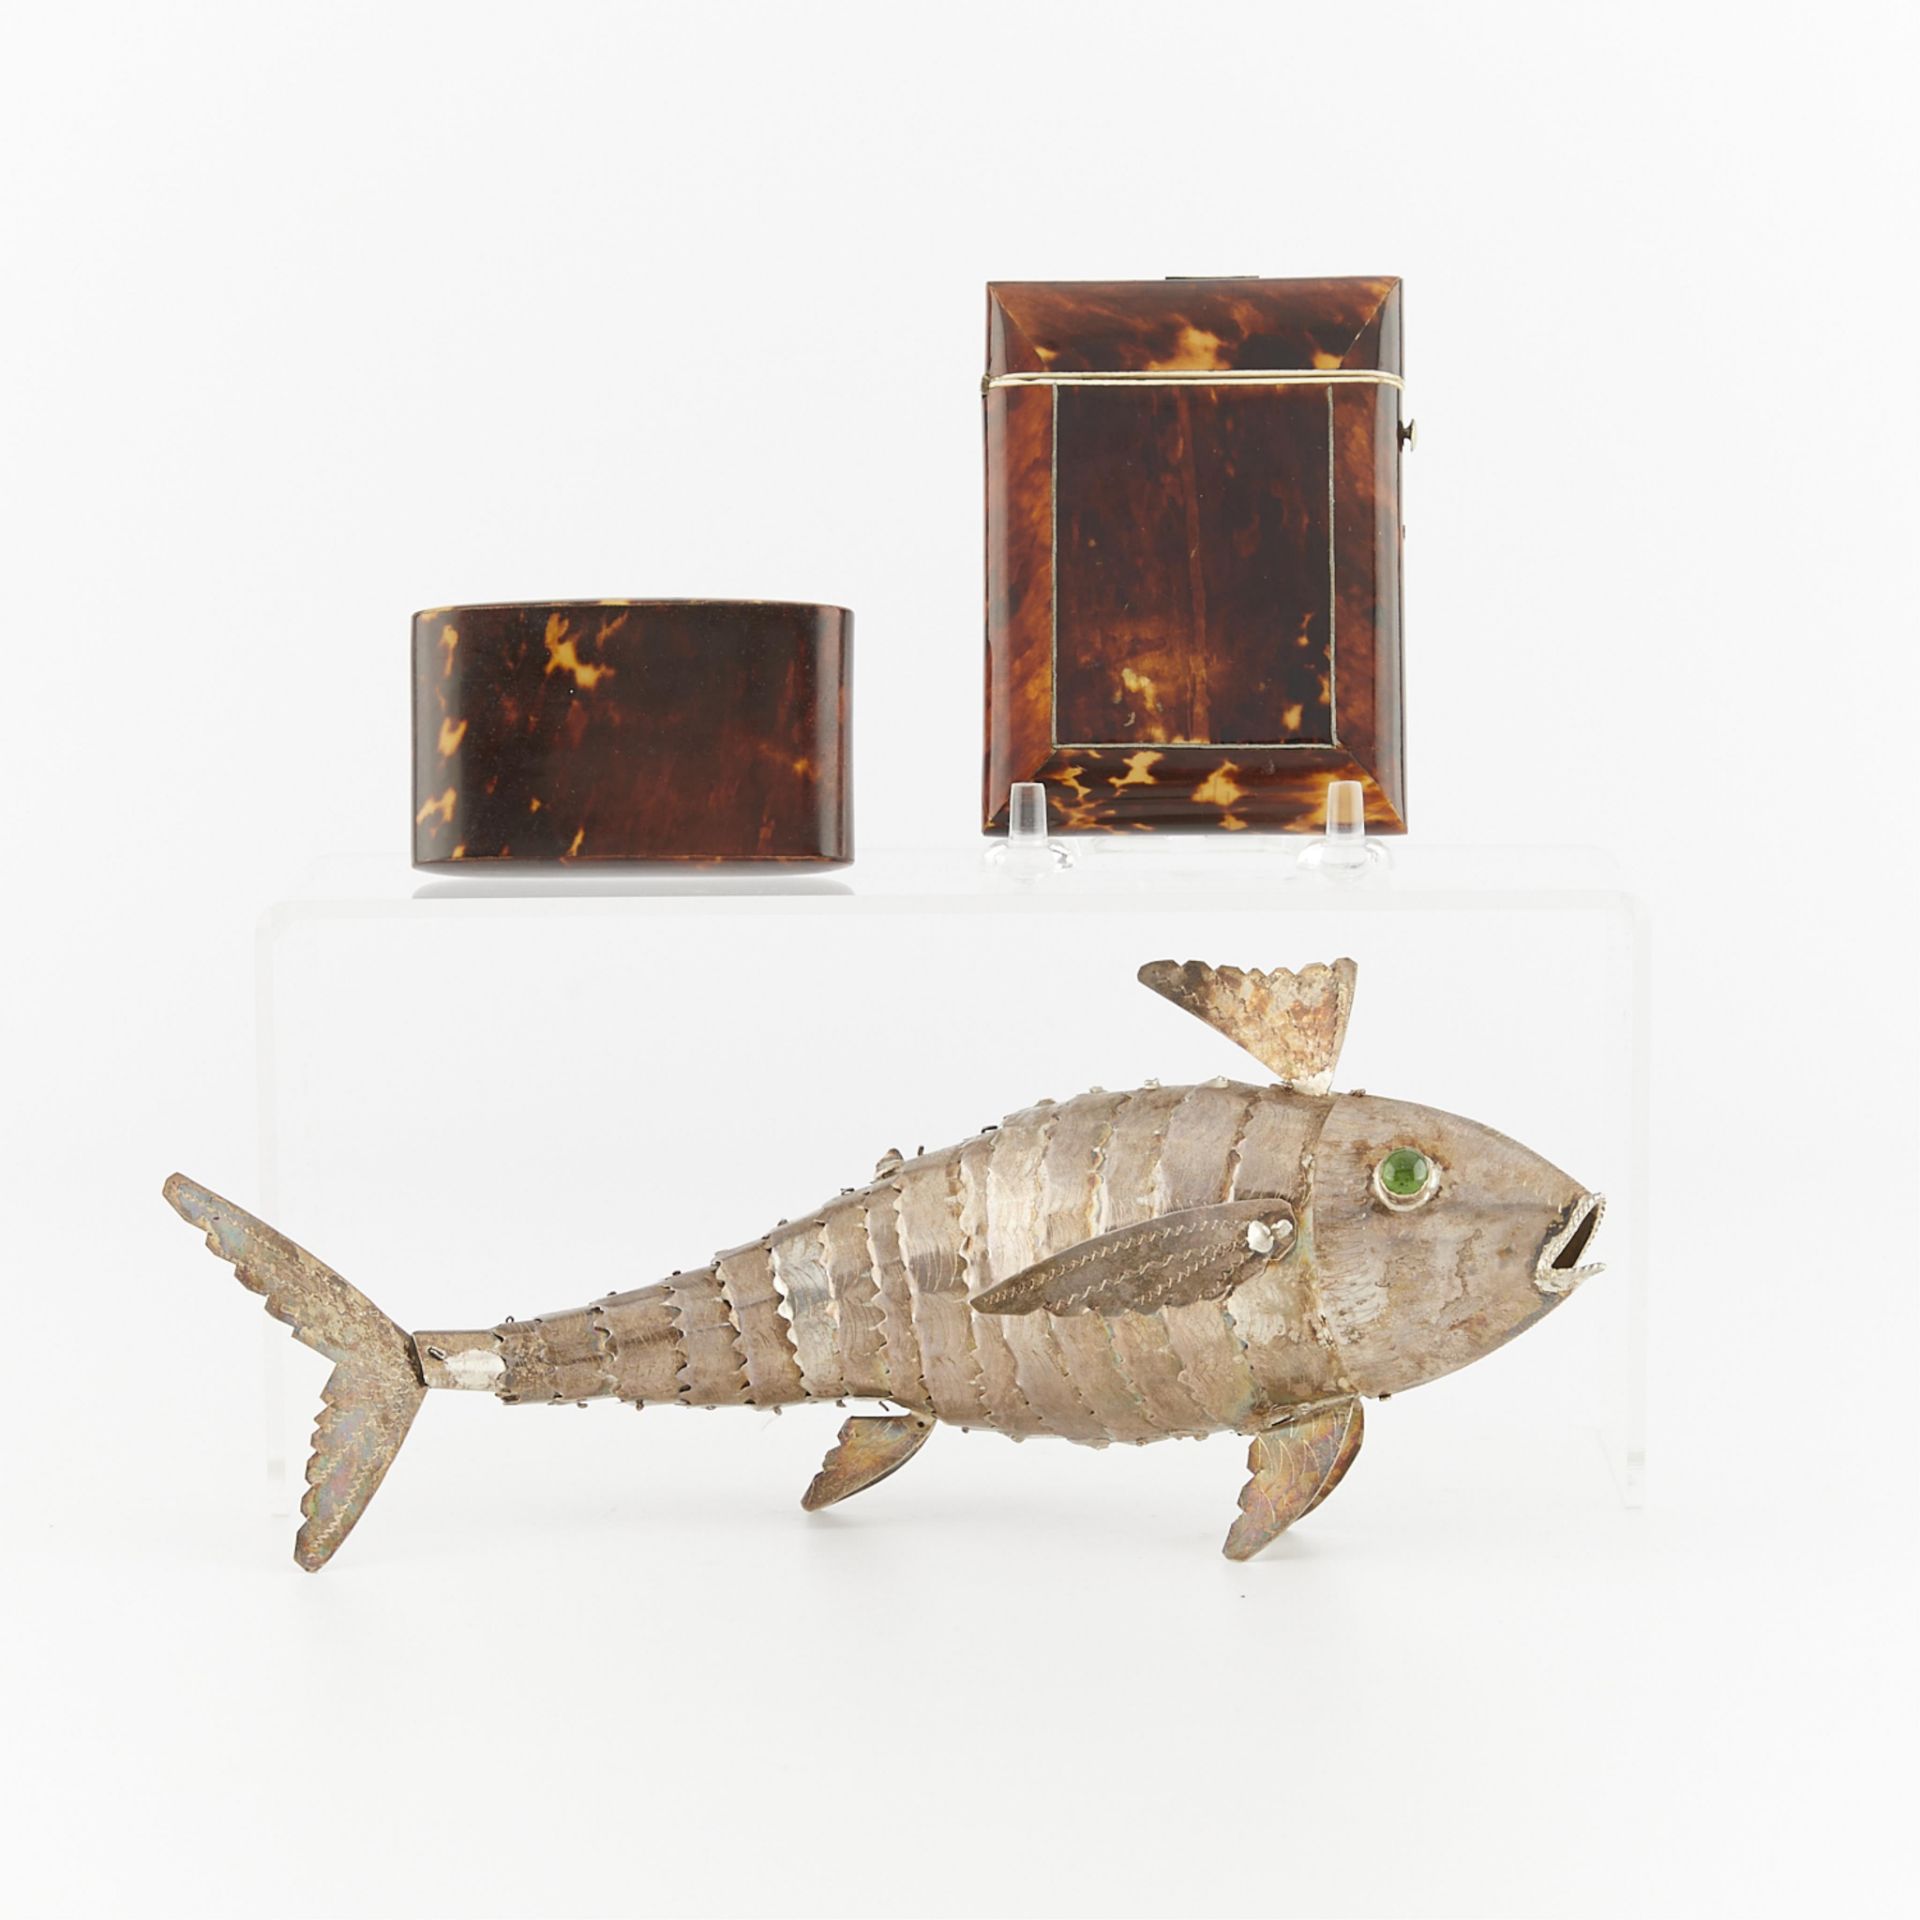 Sterling Silver Fish & 2 Tortoiseshell Cases - Image 5 of 12